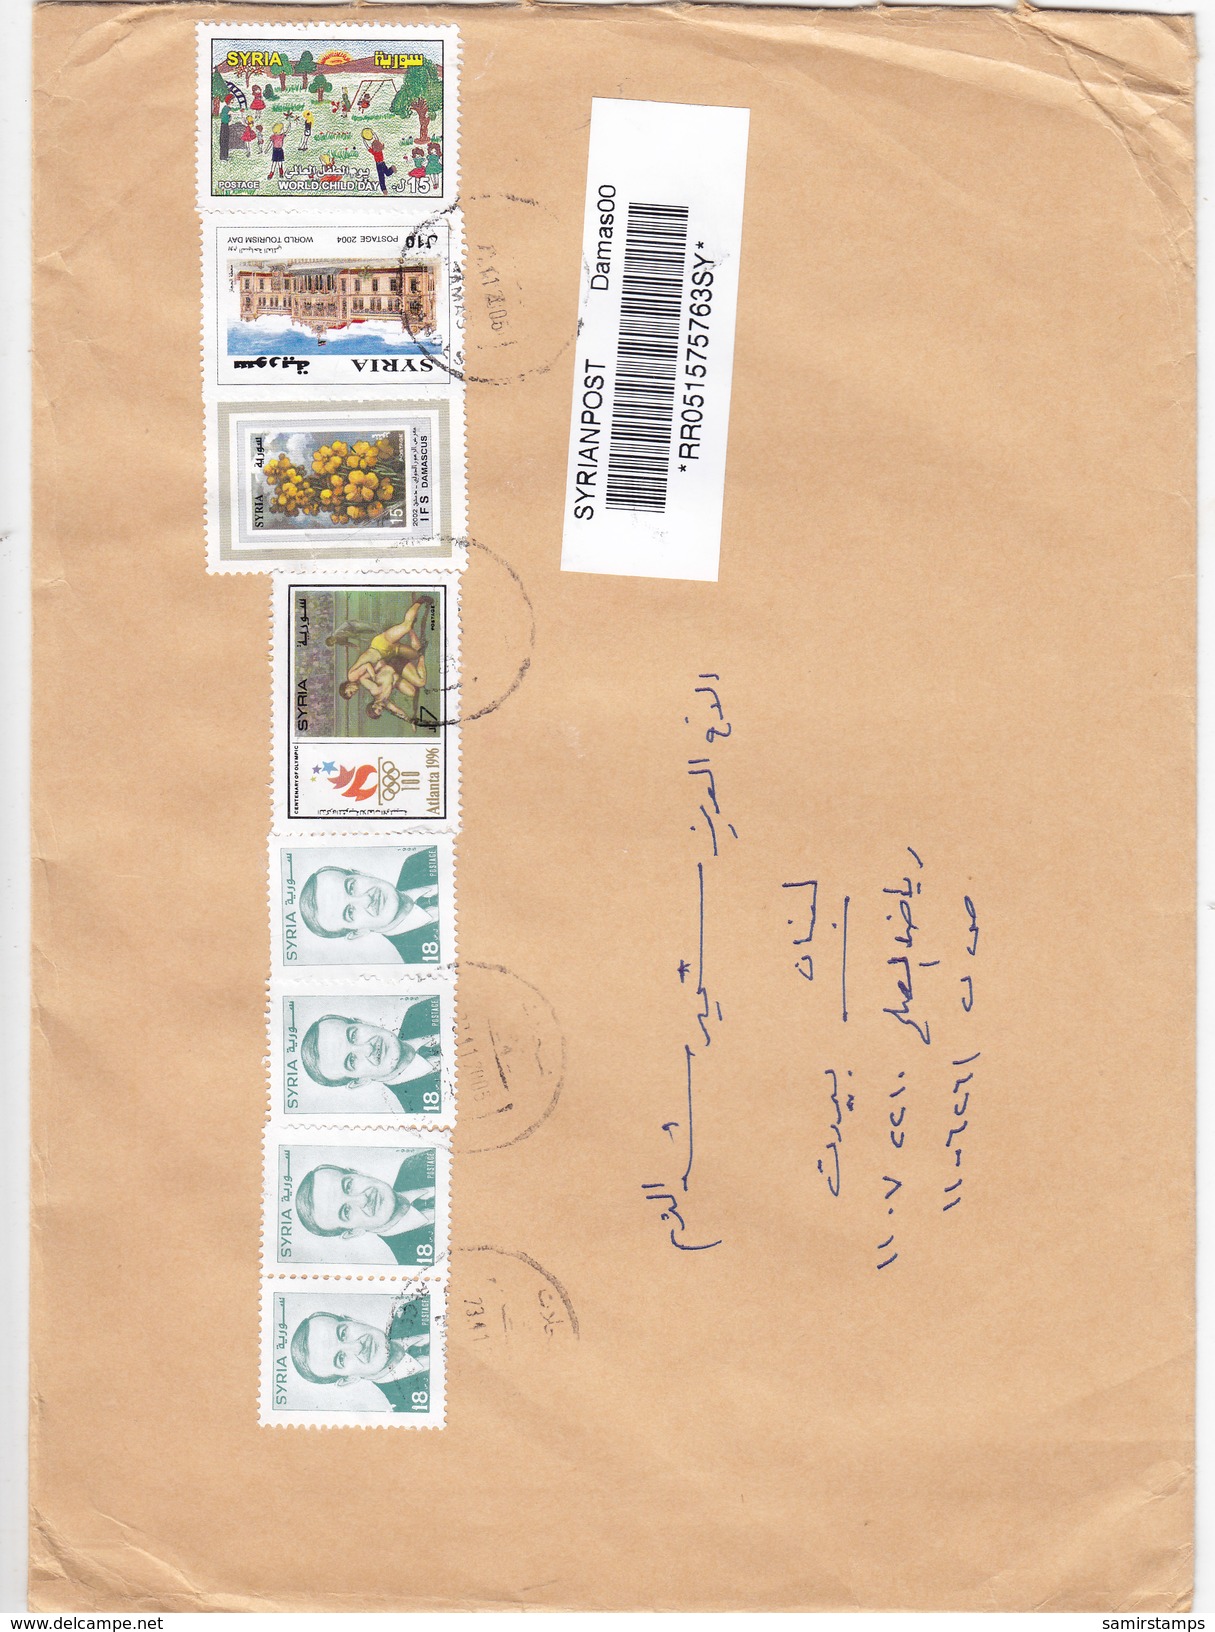 Syria Registr.cover Frabked 4 Com,stamps Large Size Cover-verso Date- 2005-fine, Red. Price-SKRILL PAY. - Syrie